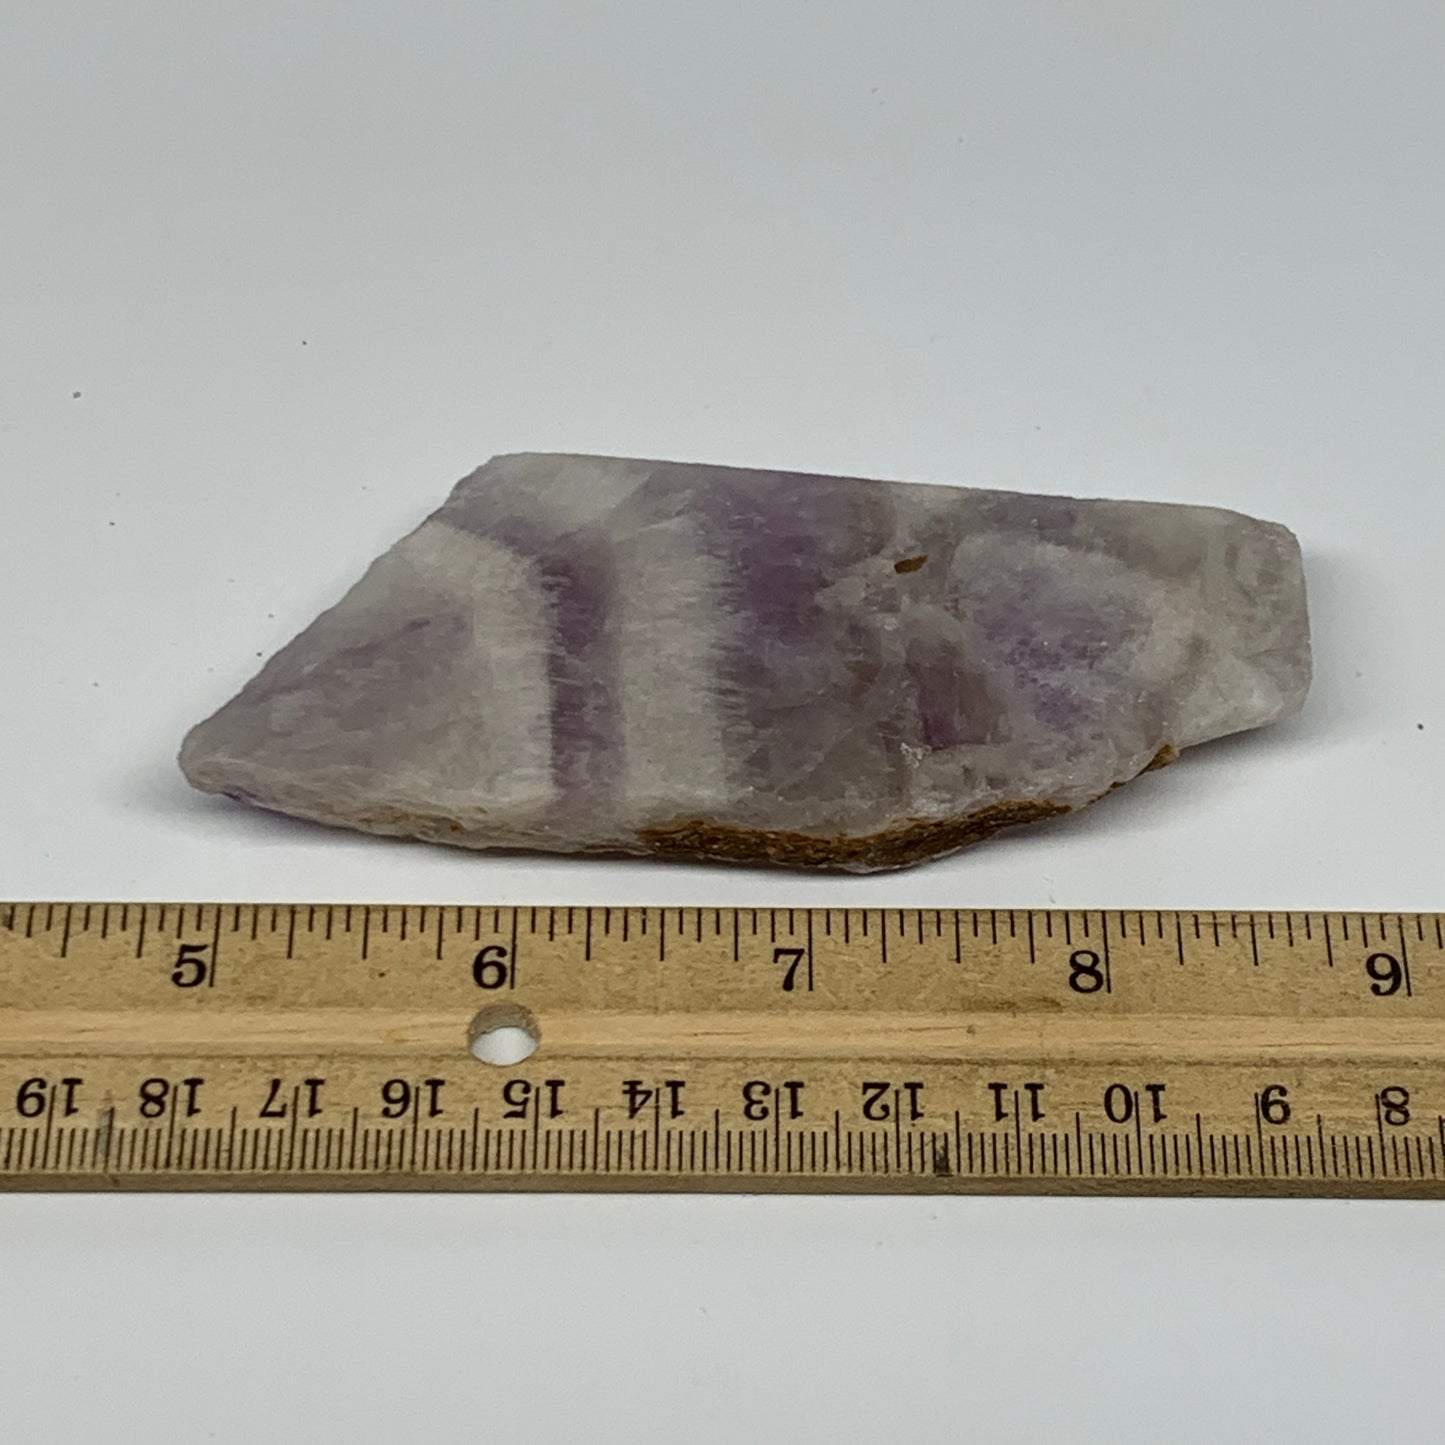 102.1g, 3.9"x1.6"x0.6", One face polished Banned Amethyst, One face semi polishe